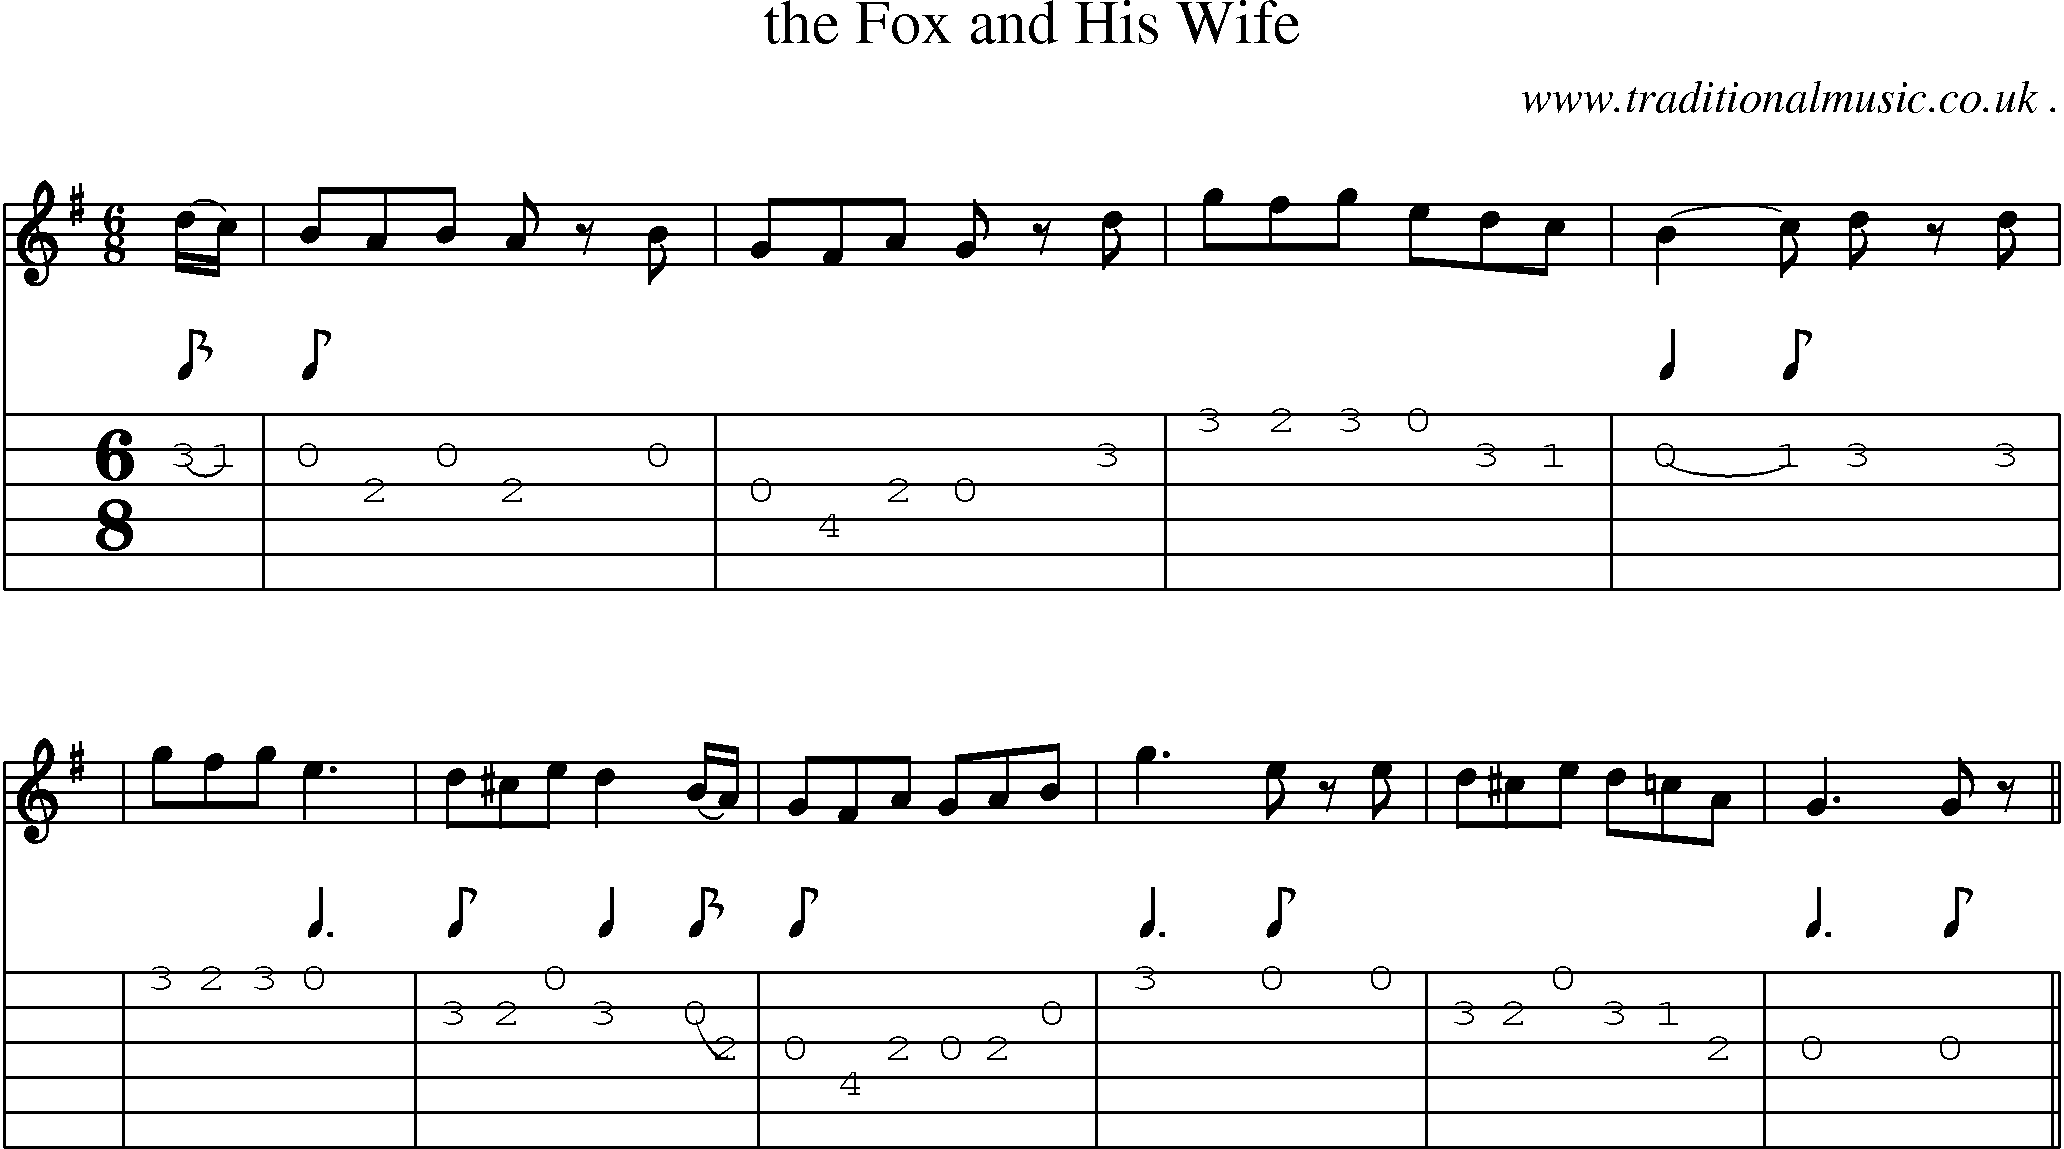 Sheet-music  score, Chords and Guitar Tabs for The Fox And His Wife